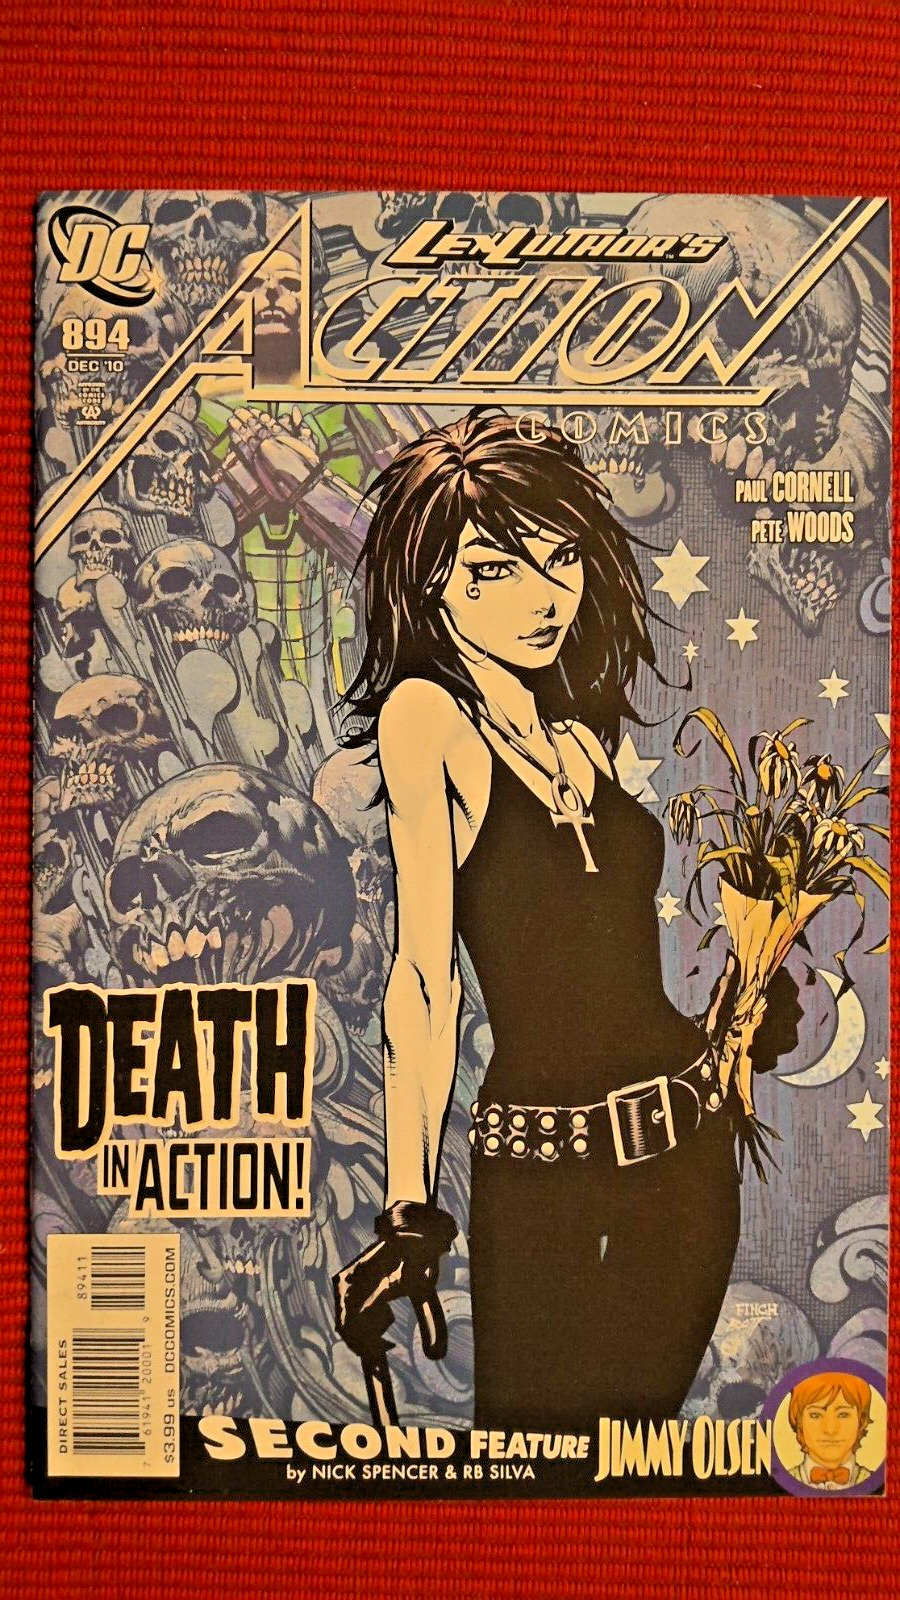 ACTION COMICS #894 (2010) 1ST DEATH OF ENDLESS IN DC CONTINUITY KEY SANDMAN